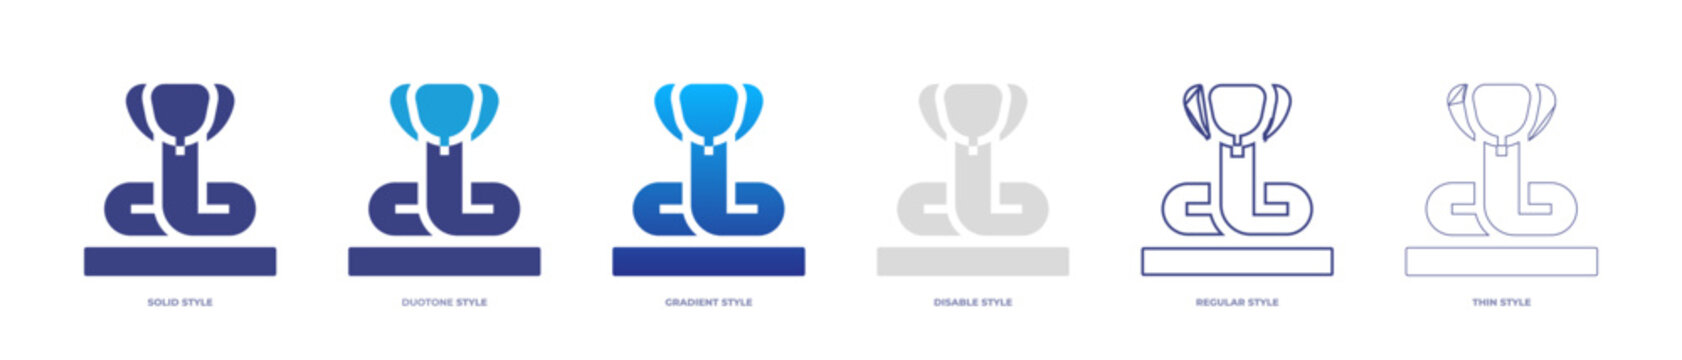 Snake icon set full style. Solid, disable, gradient, duotone, regular, thin. Vector illustration and transparent icon.